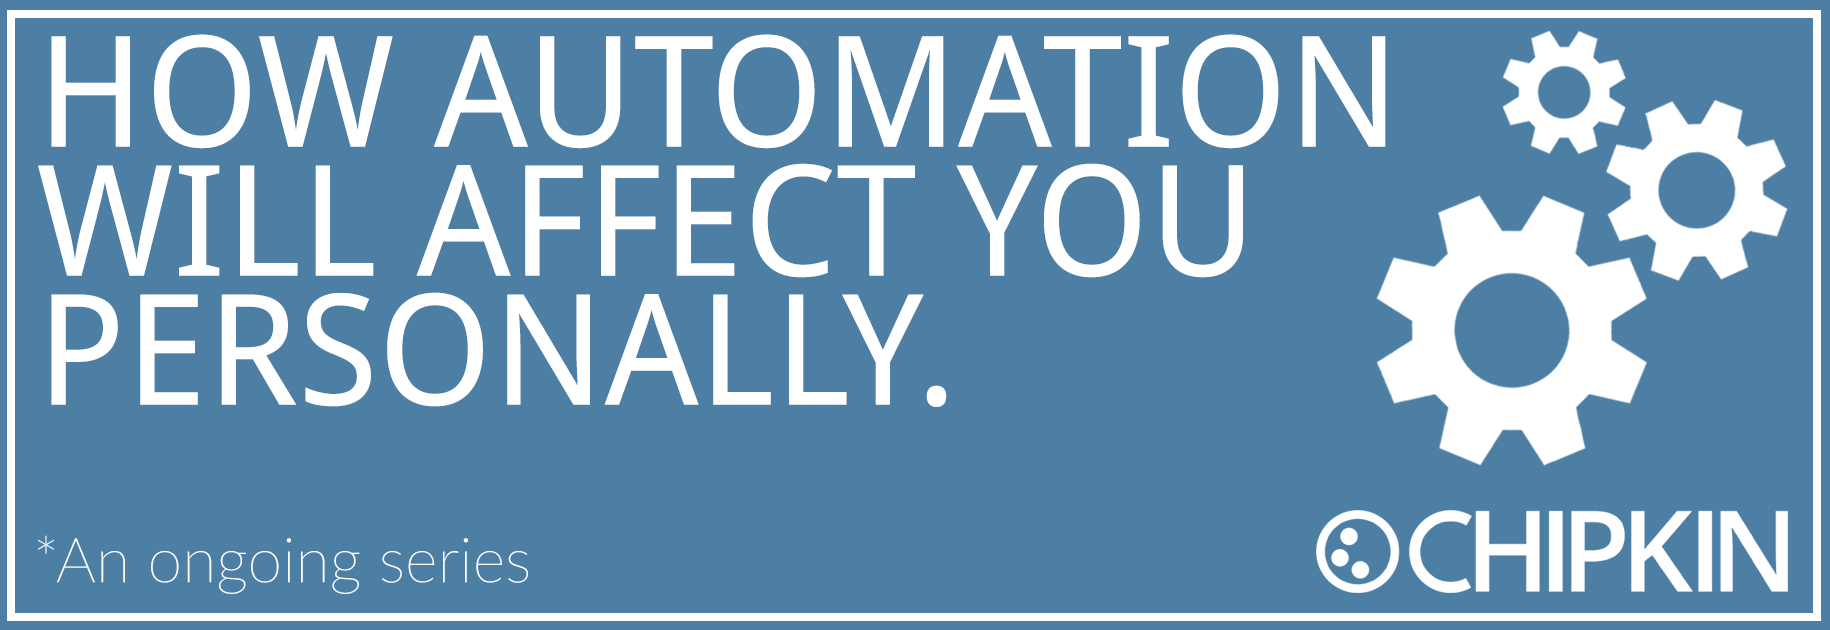 How Automation Will Affect You